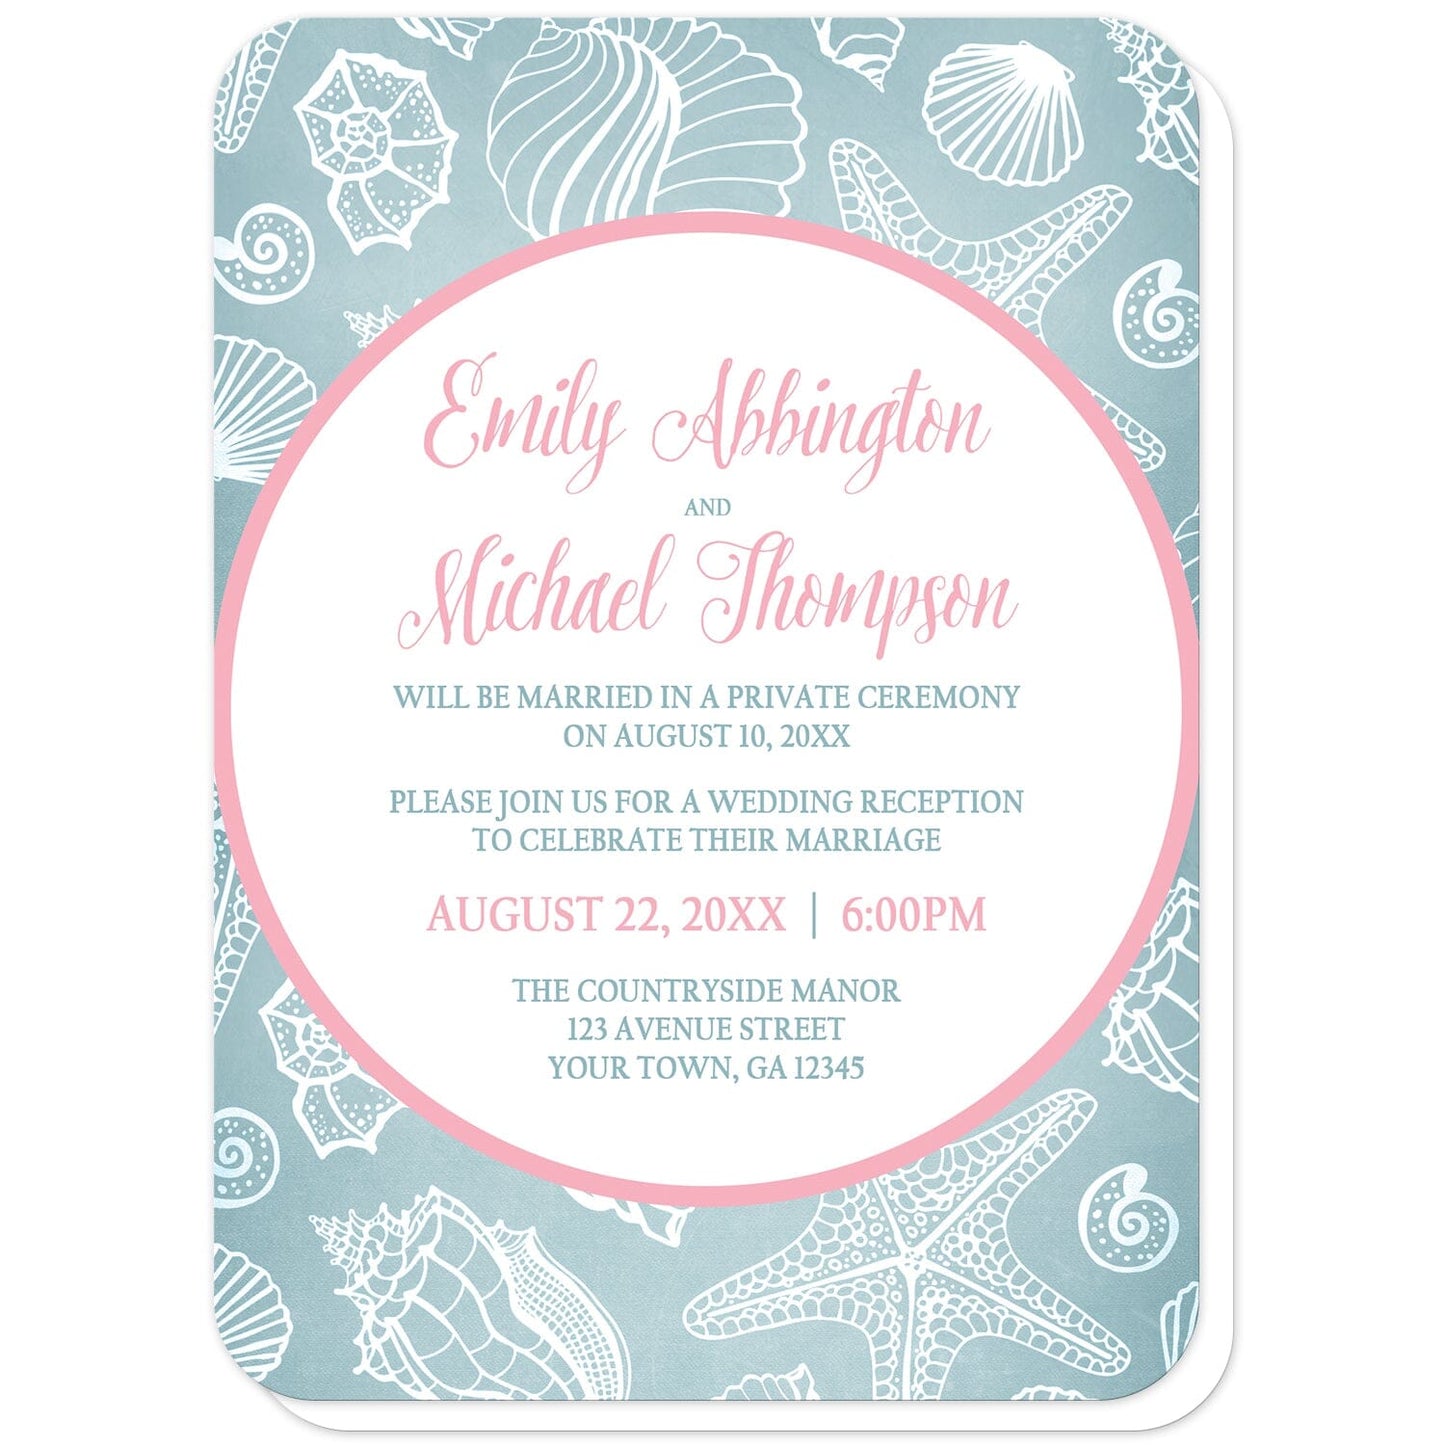 Blue Seashell Pink Beach Reception Only Invitations (with rounded corners) at Artistically Invited. Blue seashell pink beach reception only invitations designed with your personalized post-wedding reception details custom printed in pink and blue, inside a pink outlined white circle, over a blue and white seashell pattern background. 